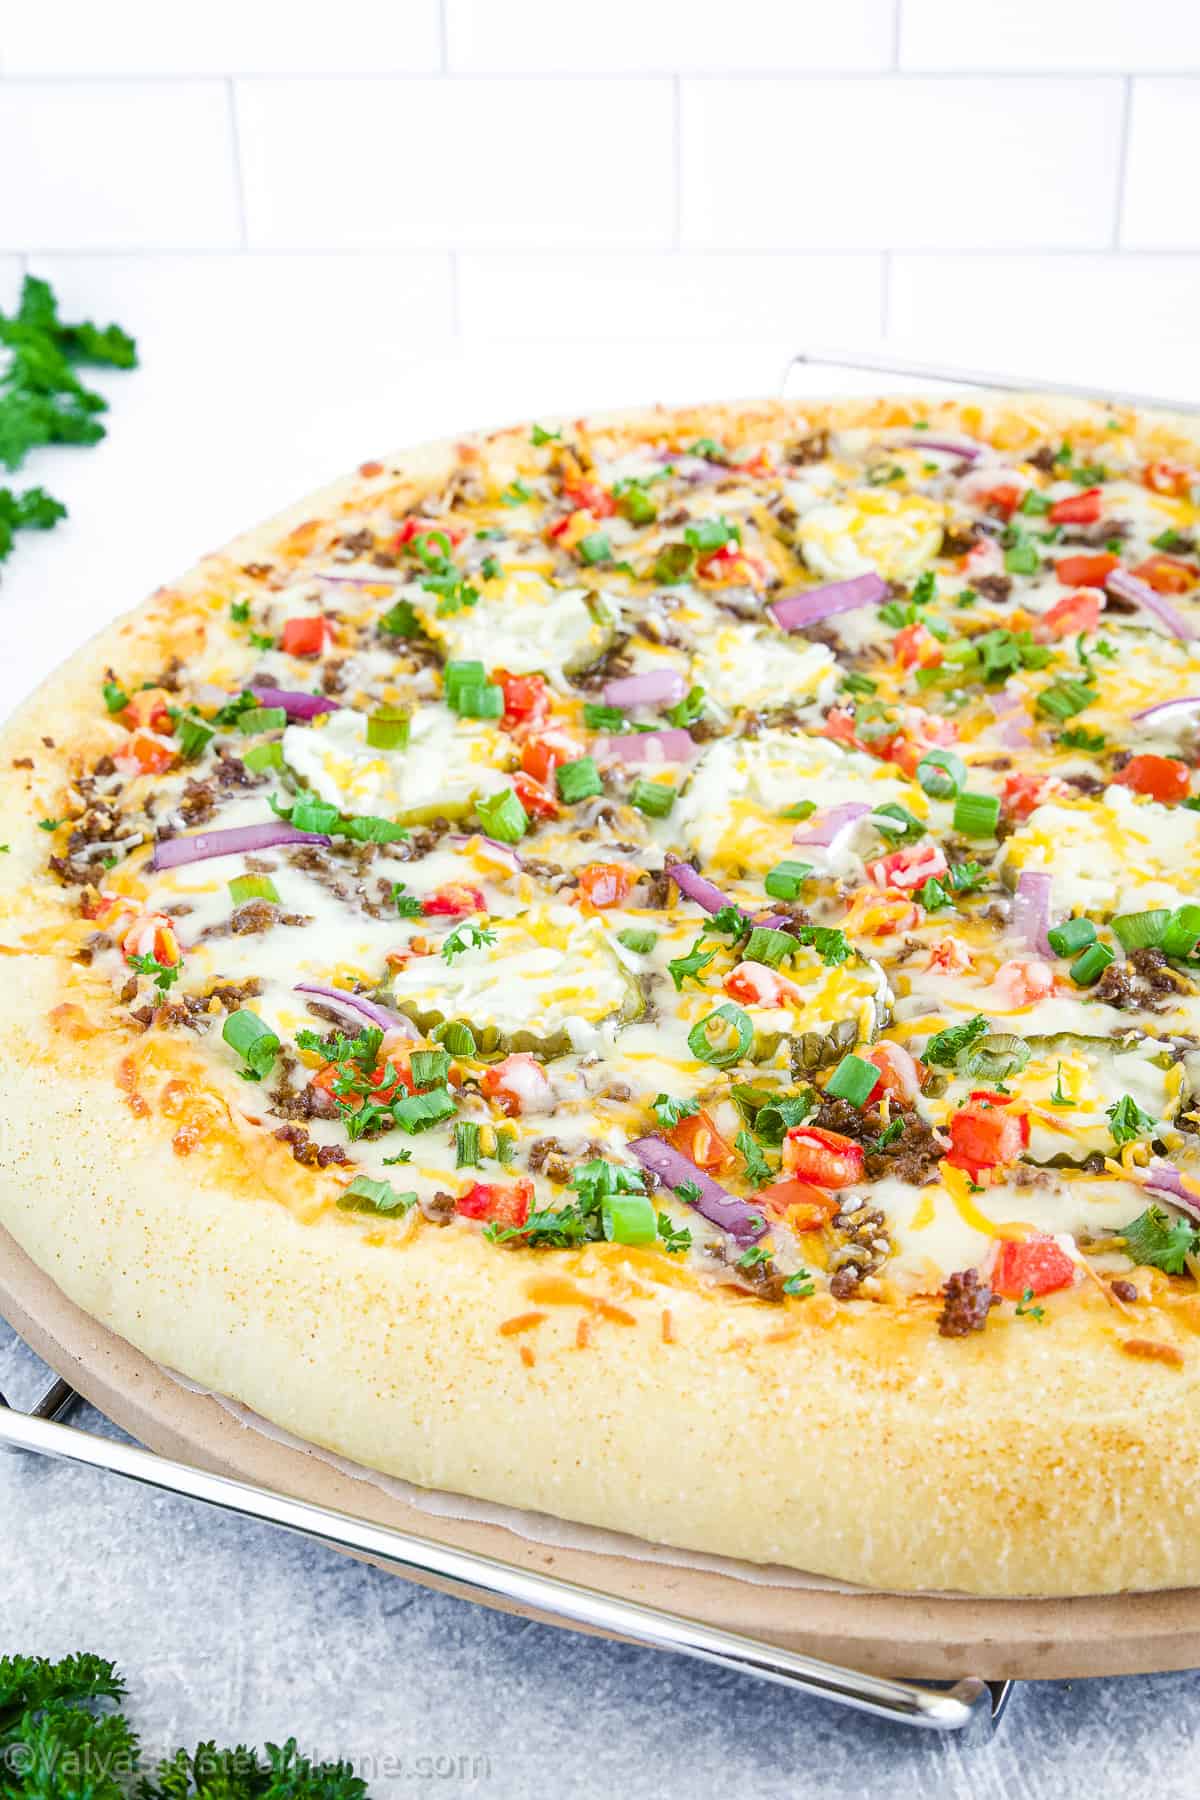 Cheeseburger Pizza is an absolutely delicious fusion of two beloved classics - cheeseburger and pizza.